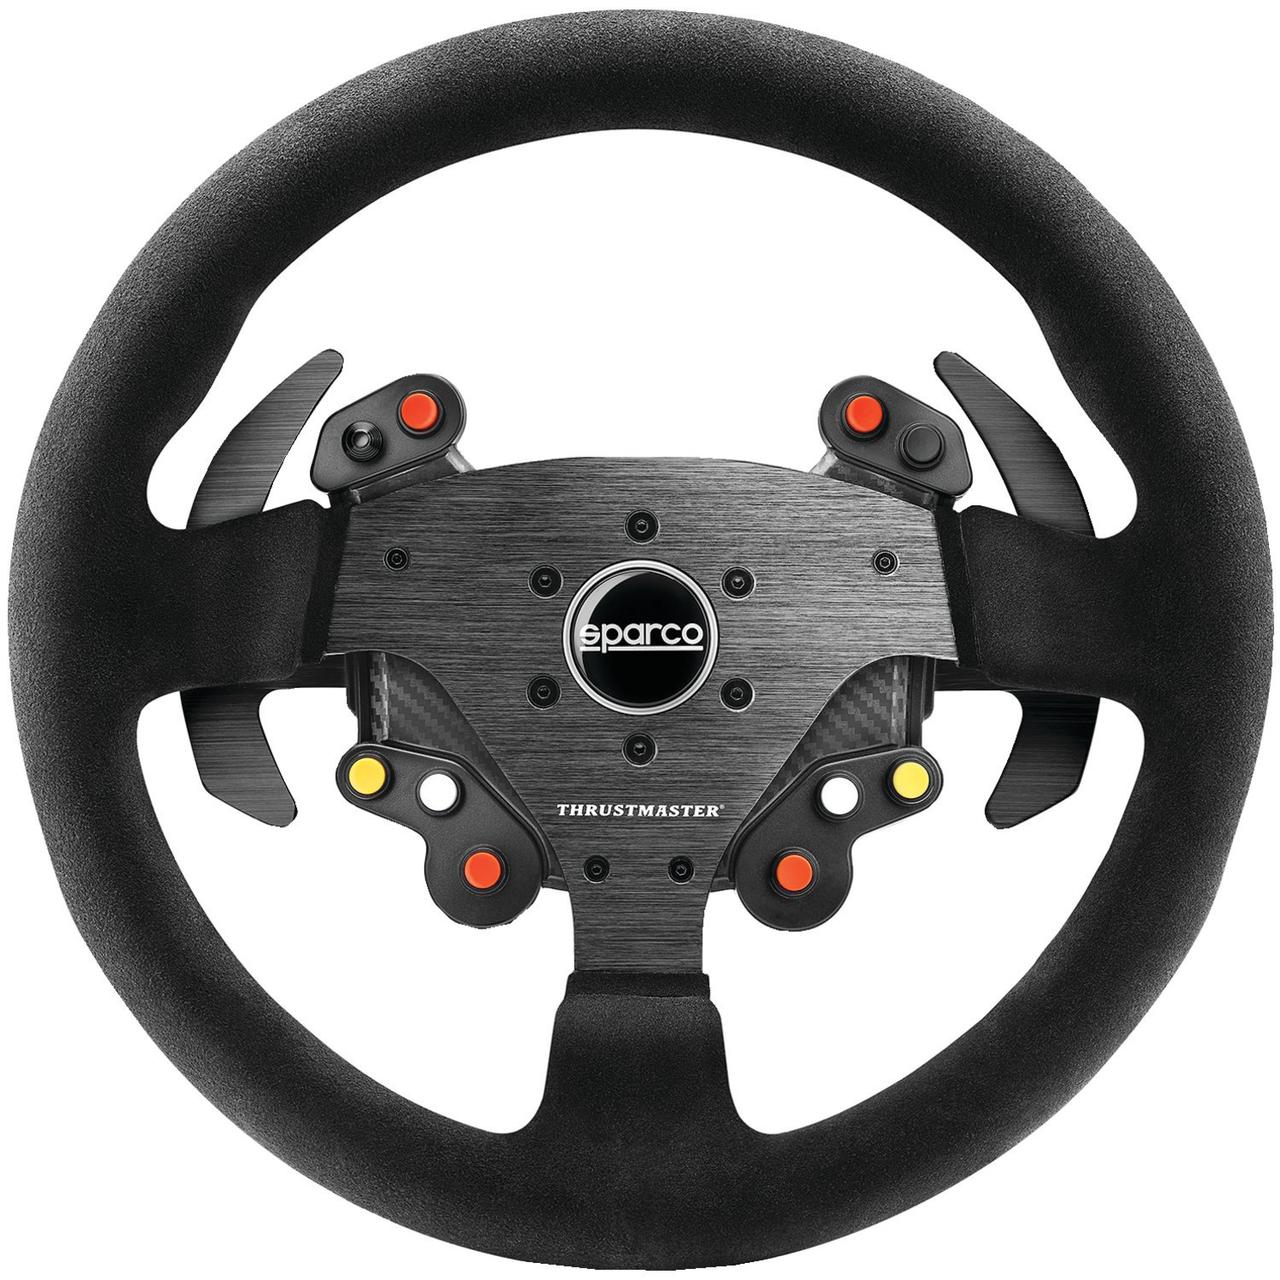 Thrustmaster R 383 Sparco Wheel for PS4, PS5, Xbox One, Series X/S, and PC - image 1 of 5